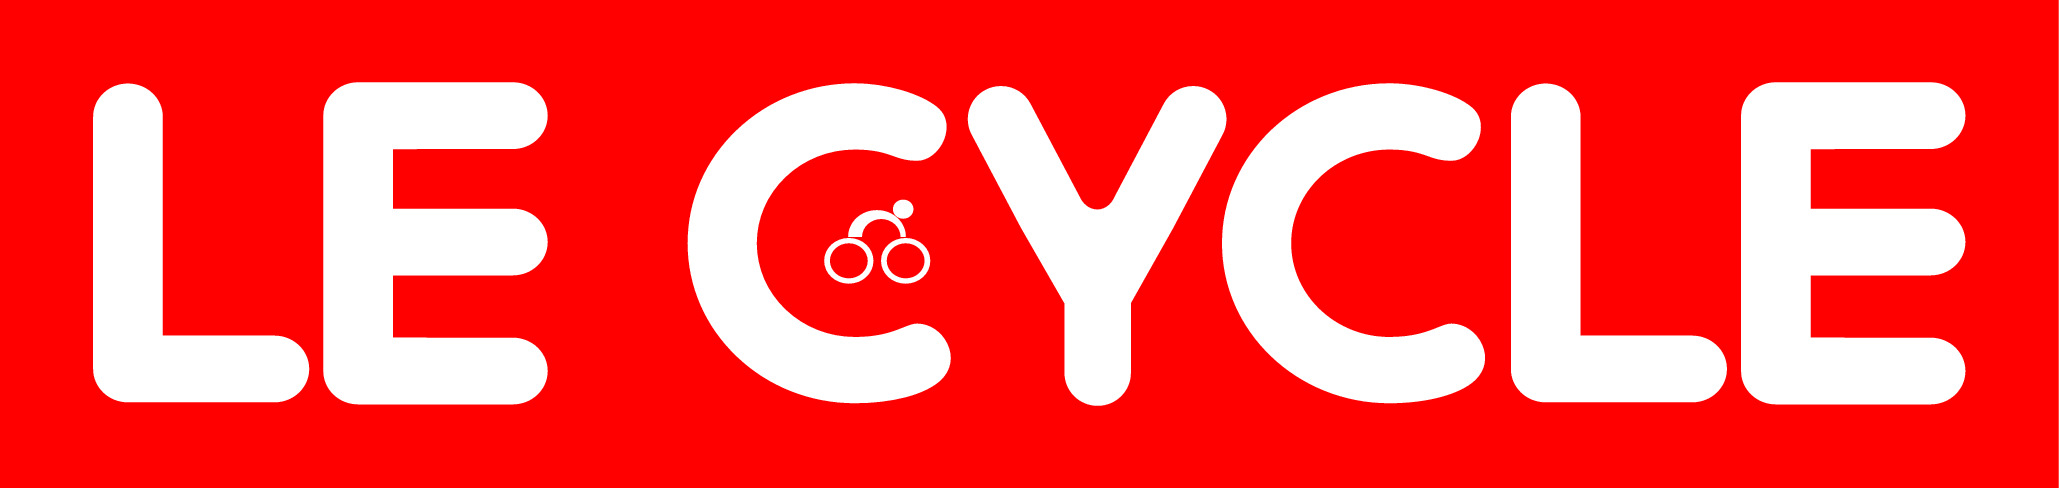 LOGO LE CYCLE 2012 Red blanc